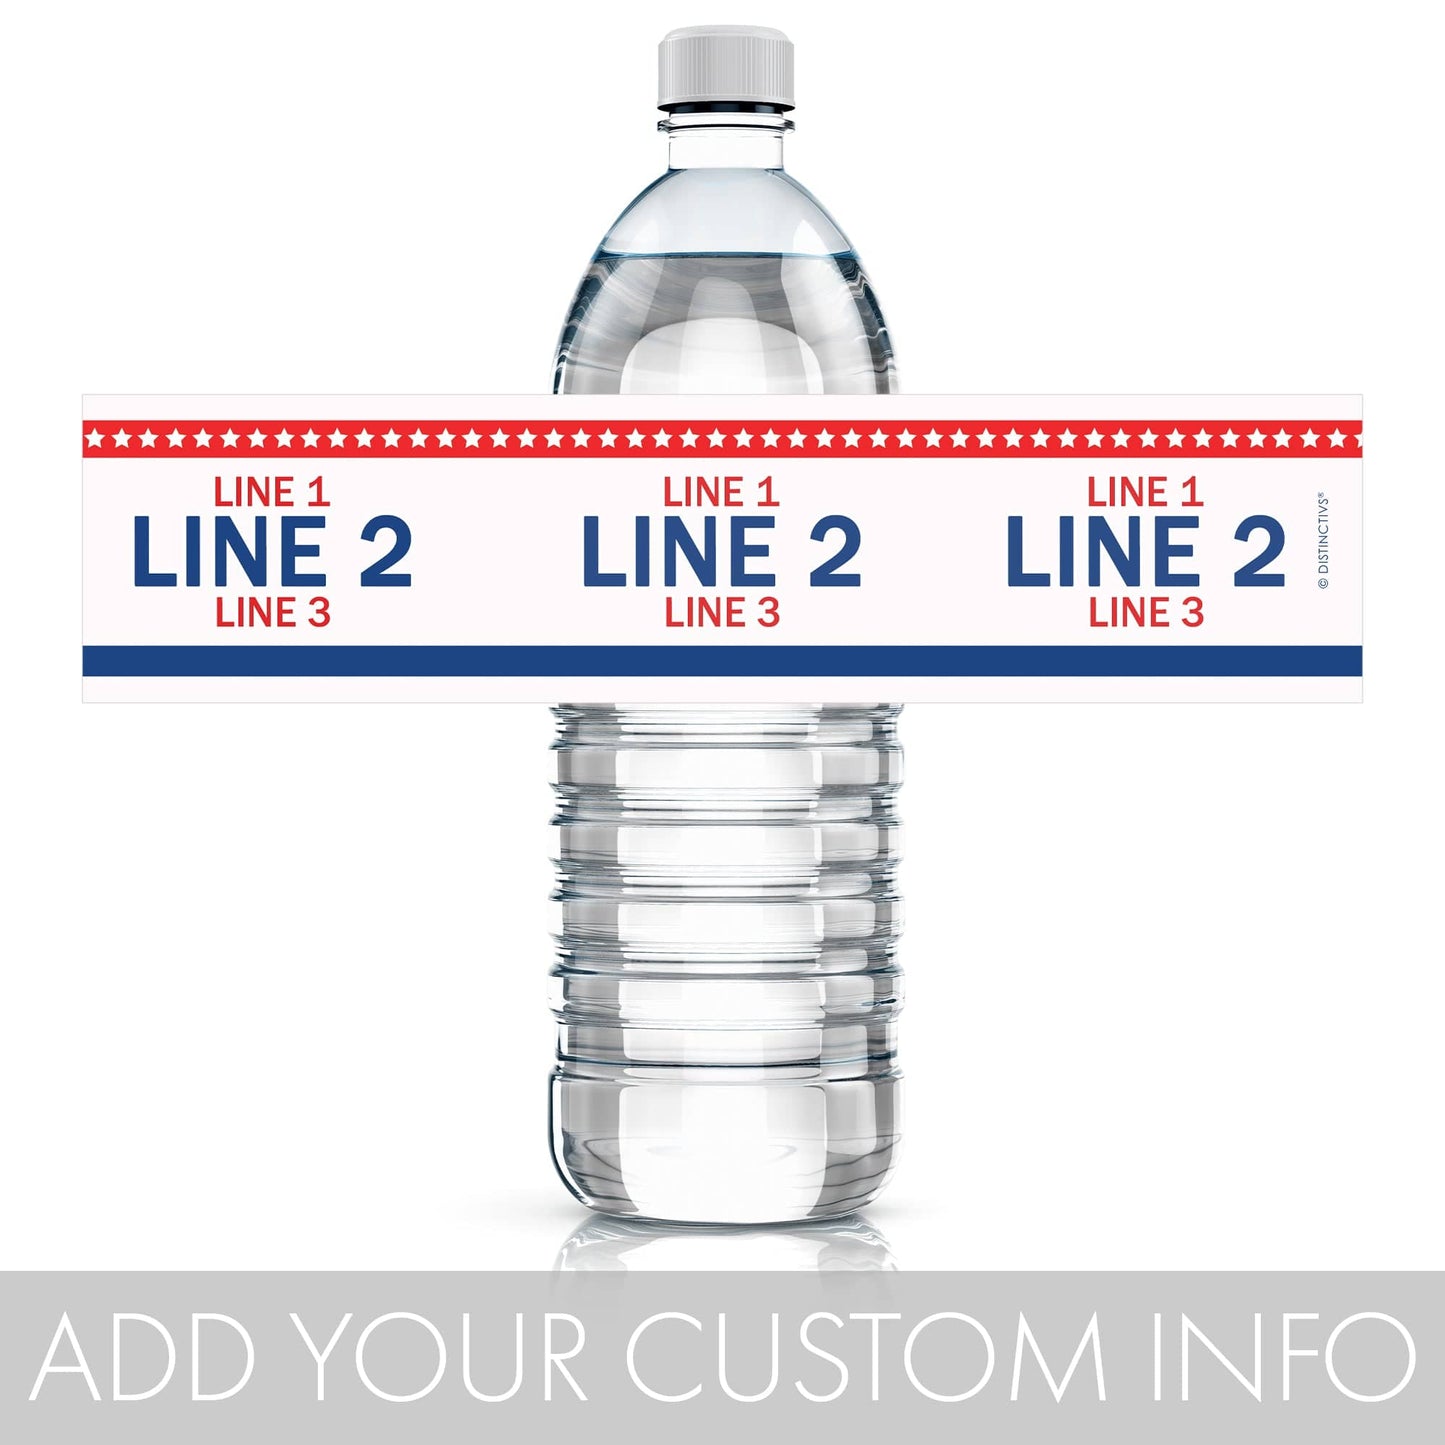 Personalized Political Campaign Vote For Water Bottle Labels - Customize 250 Stickers - White